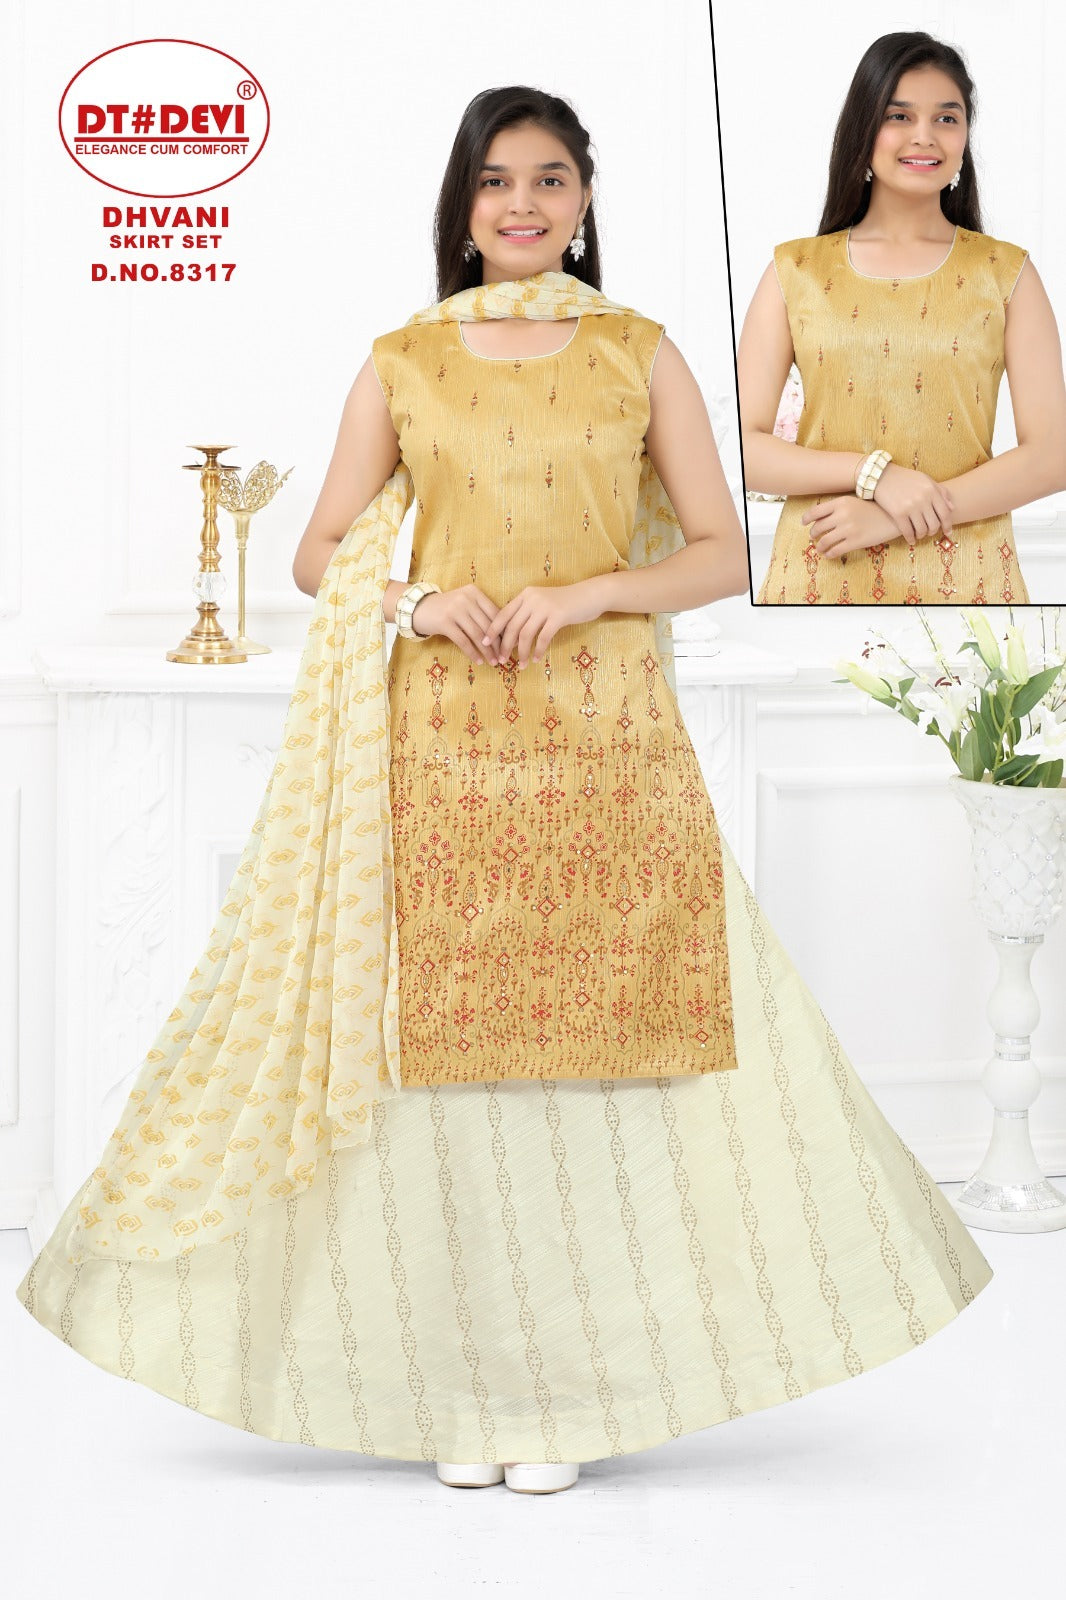 Dhvani-8317 Dt Devi Silk Girls Readymade Skirt Style Suits